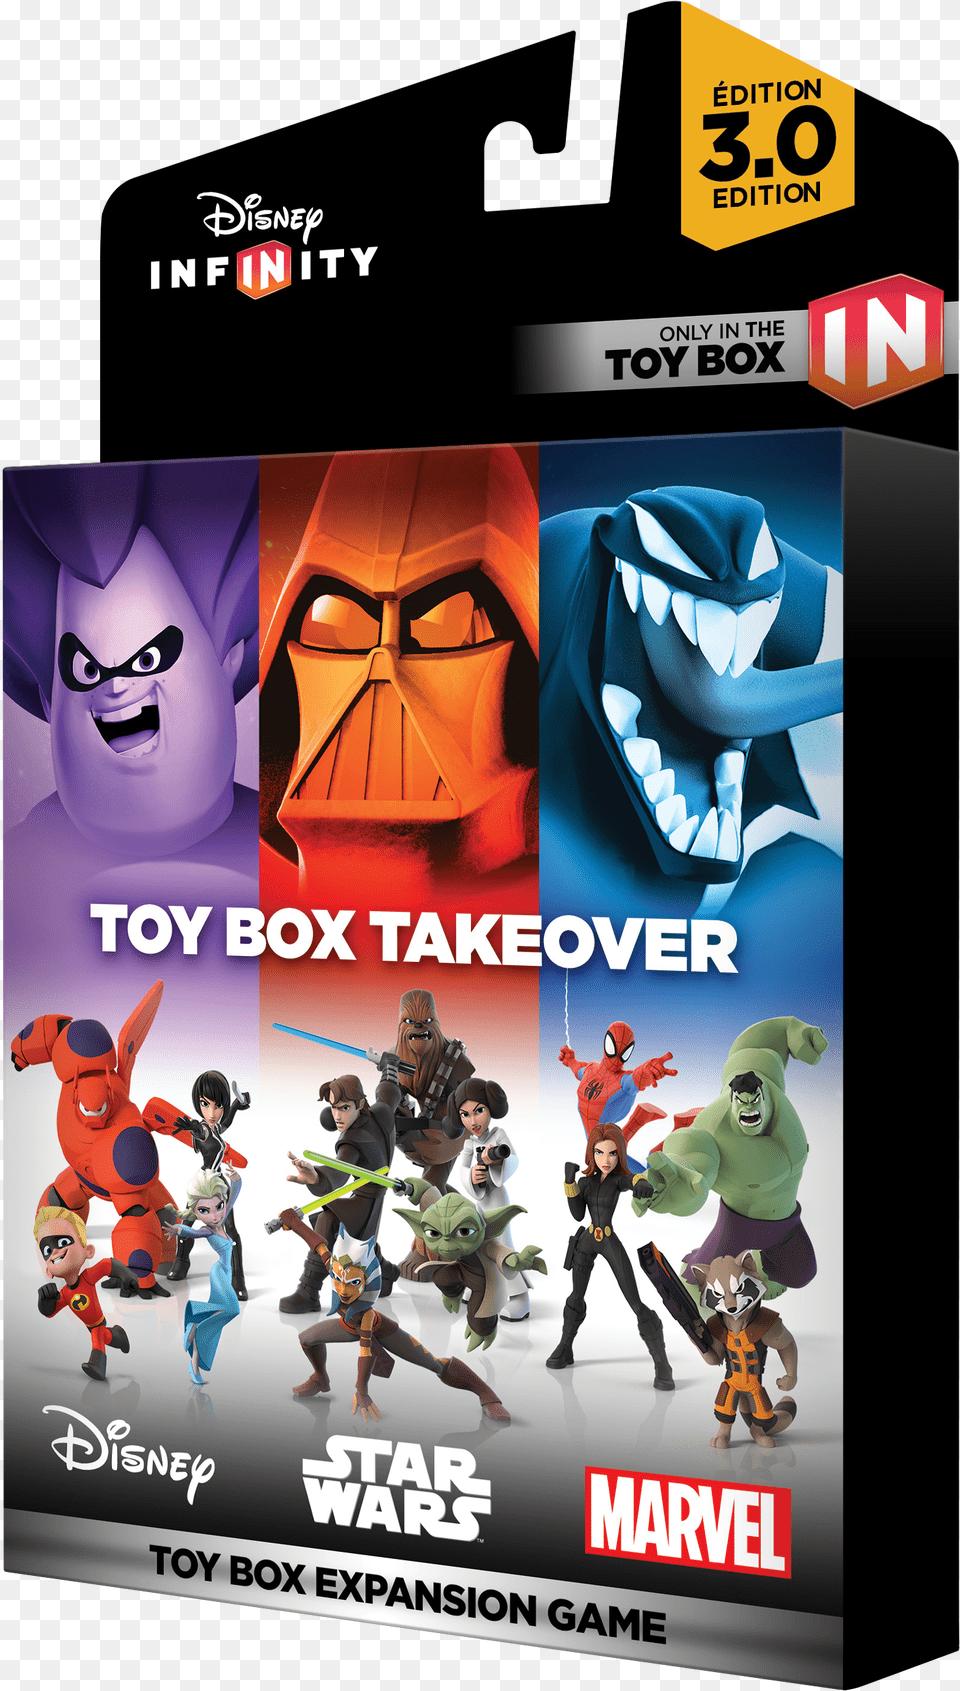 Disney Infinity Toy Box Takeover Download Disney Infinity 30 Toy Box Take Over, Advertisement, Poster, Adult, Person Png